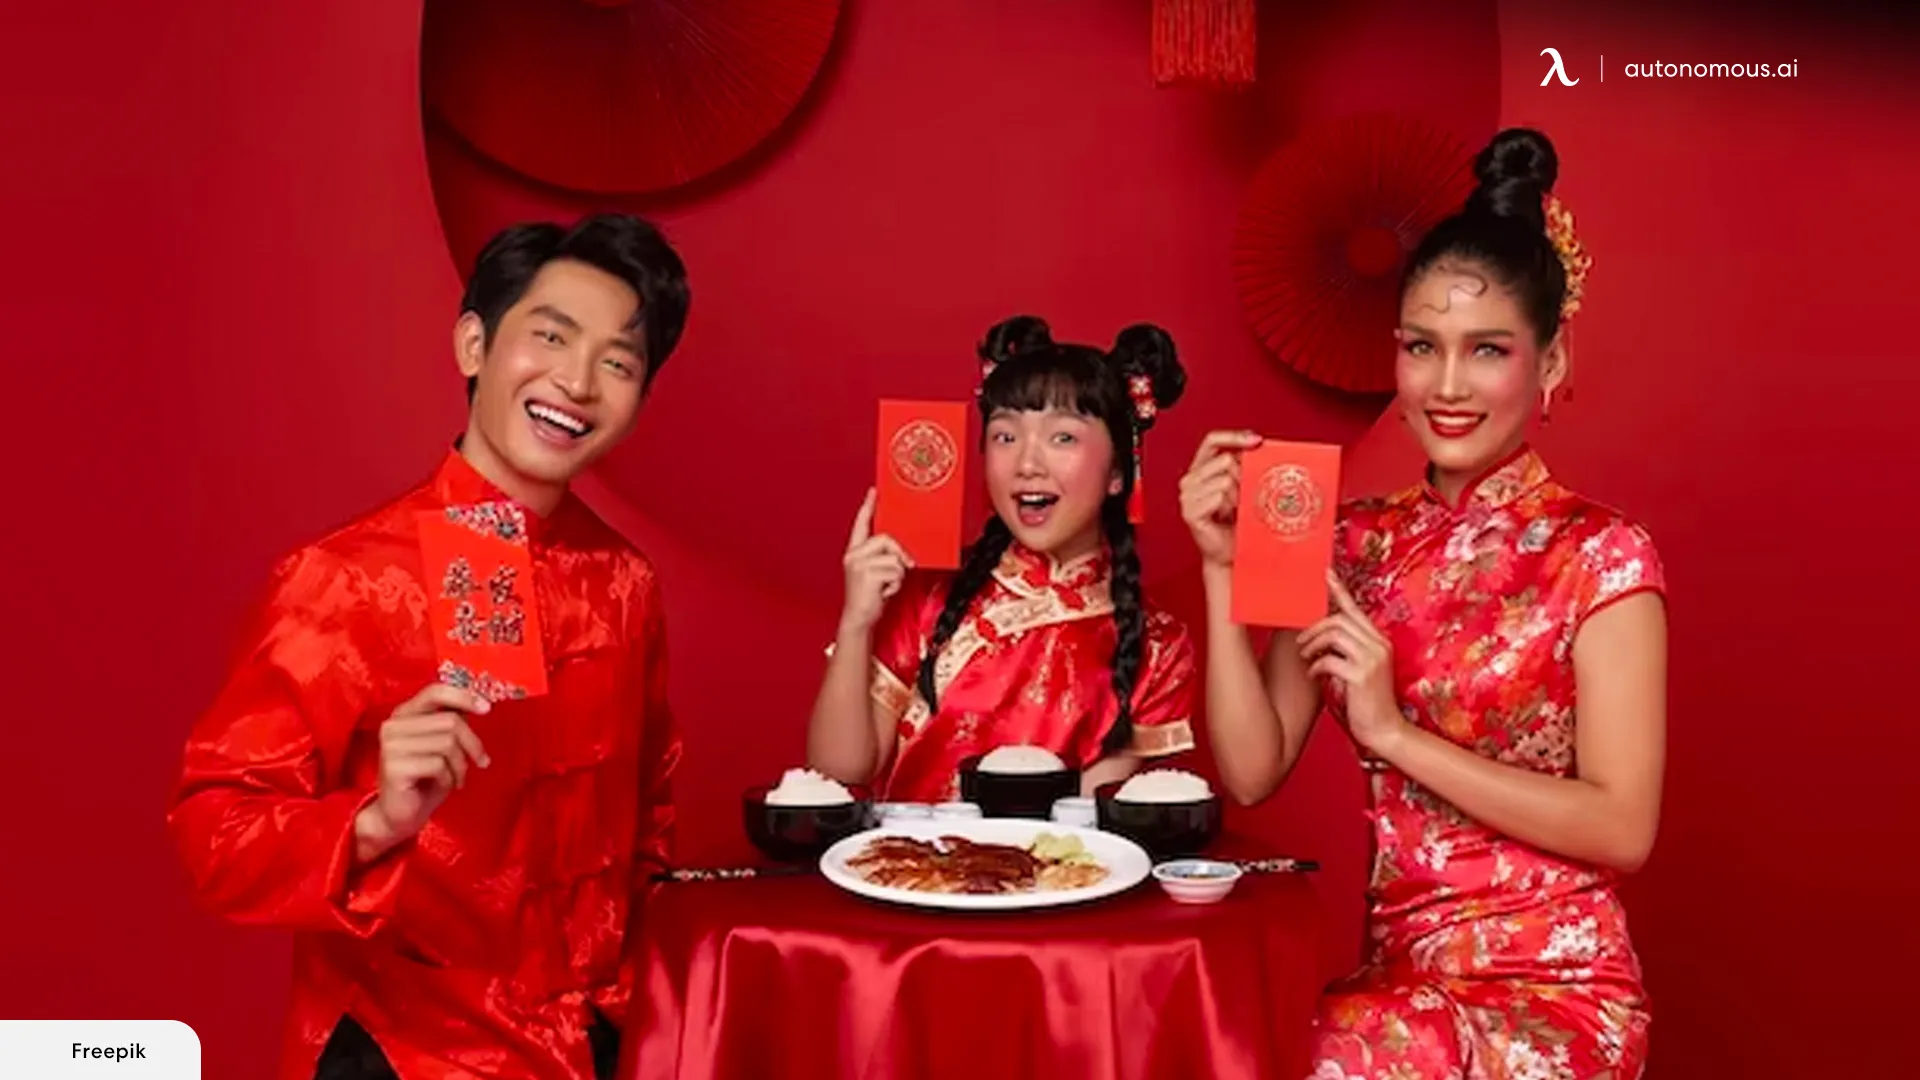 Learn More About the Chinese Lunar New Year Celebration